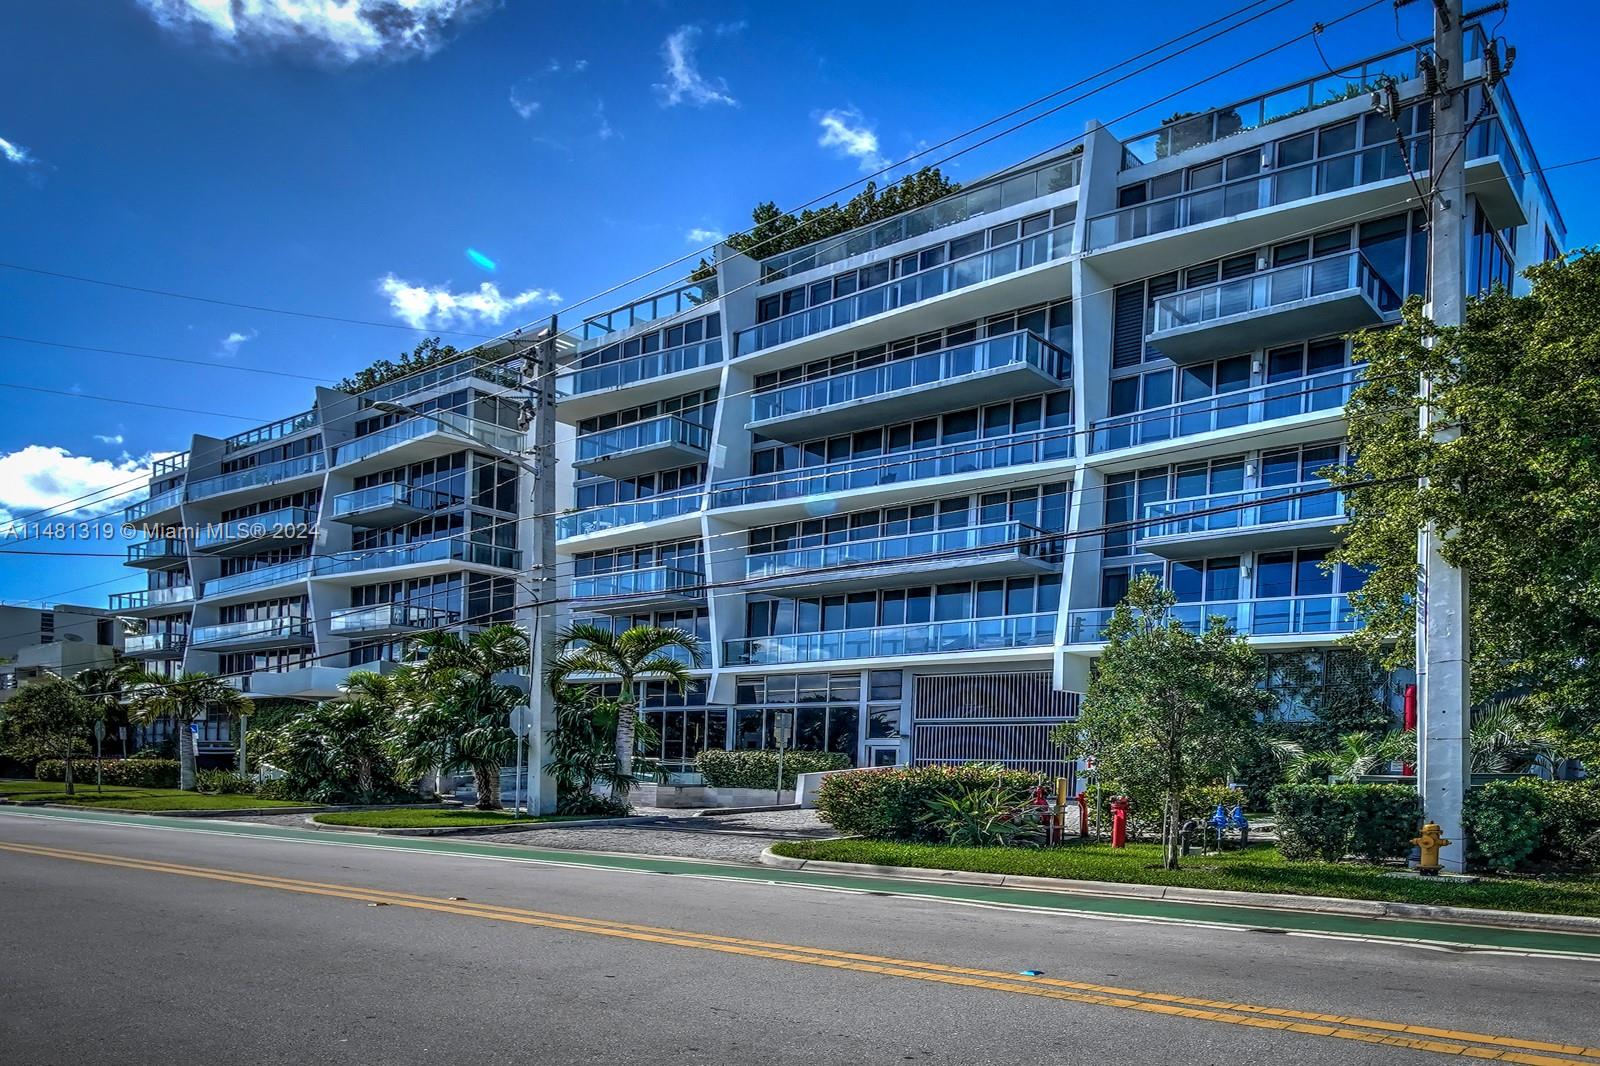 Magnificent extra large PH apartment at this magnificent Bayfront boutique condo in Bay Harbor Islands. Offers the convenience of a condo and the lifestyle of a waterfront home—a boutique building on the water. The space has 4 bedrooms and 4.5 baths with extraordinary city skyline views and amazing sunsets. Includes 4 parking spaces, 2 storage spaces, and a boat dock space. Fully furnished. ***BONUS PRIVATE BOAT DECK! Boat slip included slip number 10 (21 feet boat).***